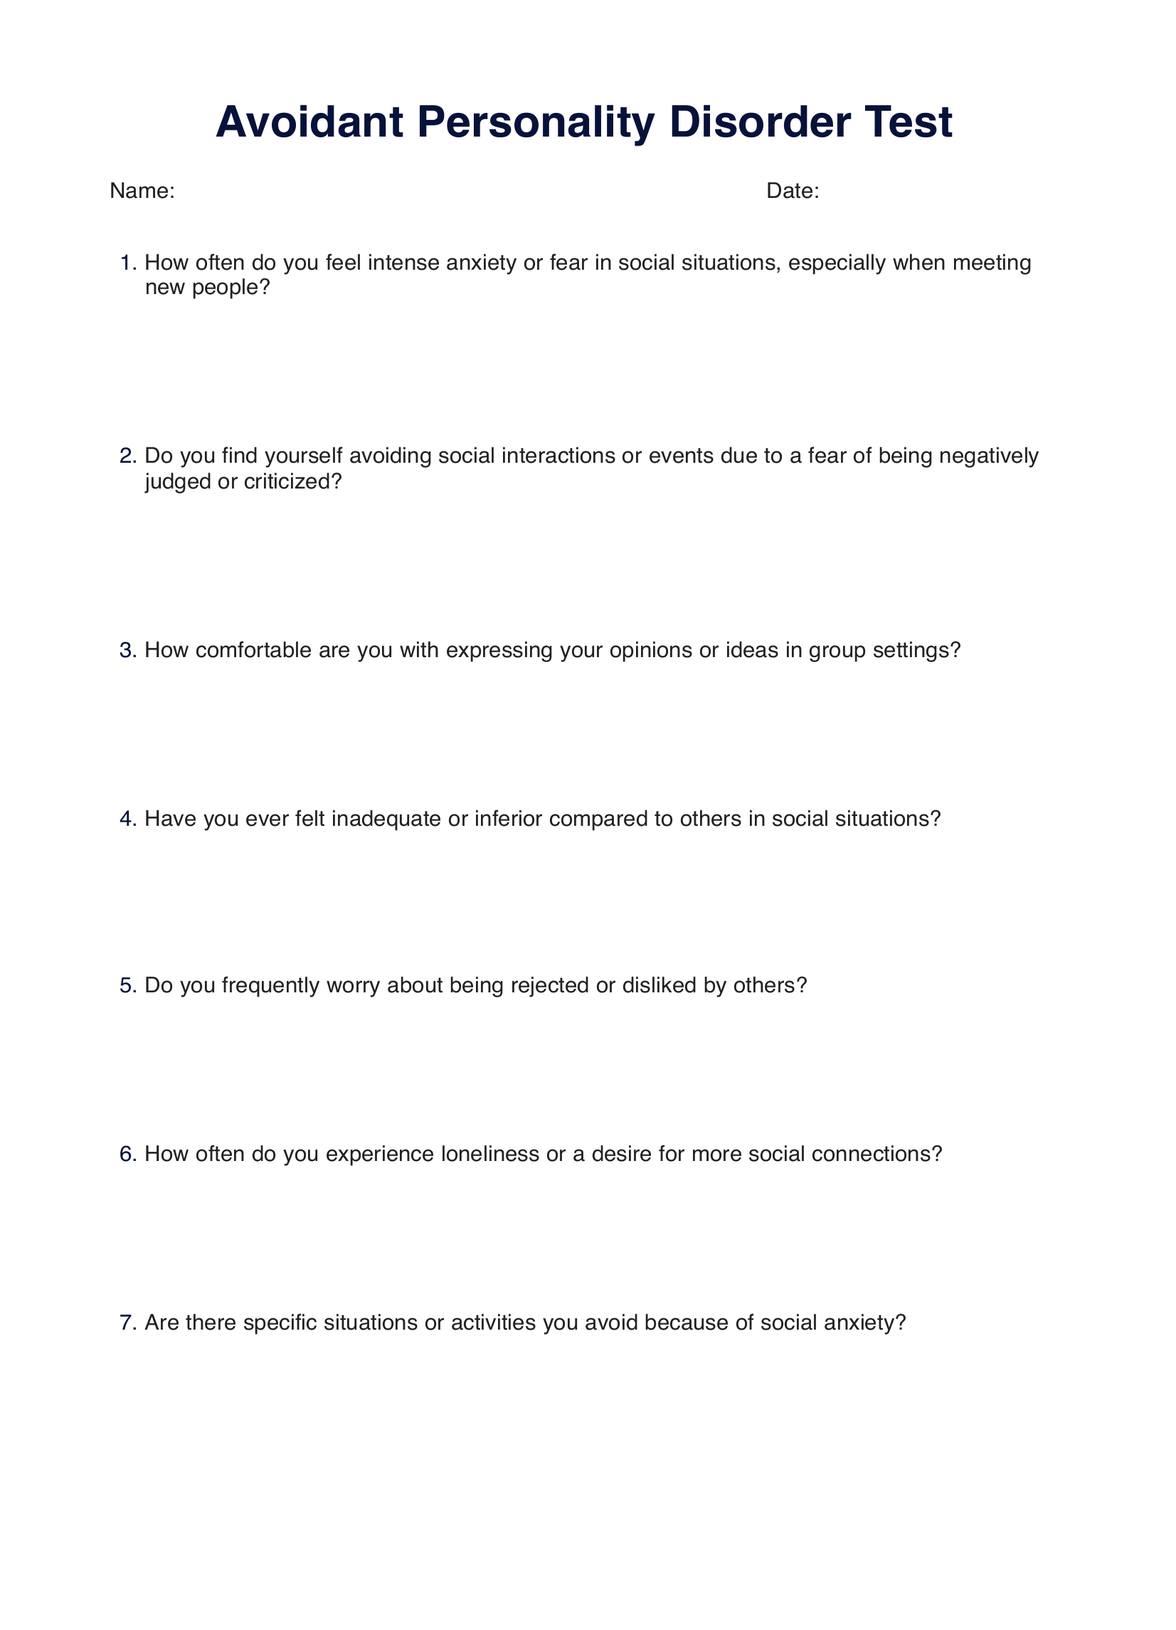 Avoidant Personality Disorder Test PDF Example